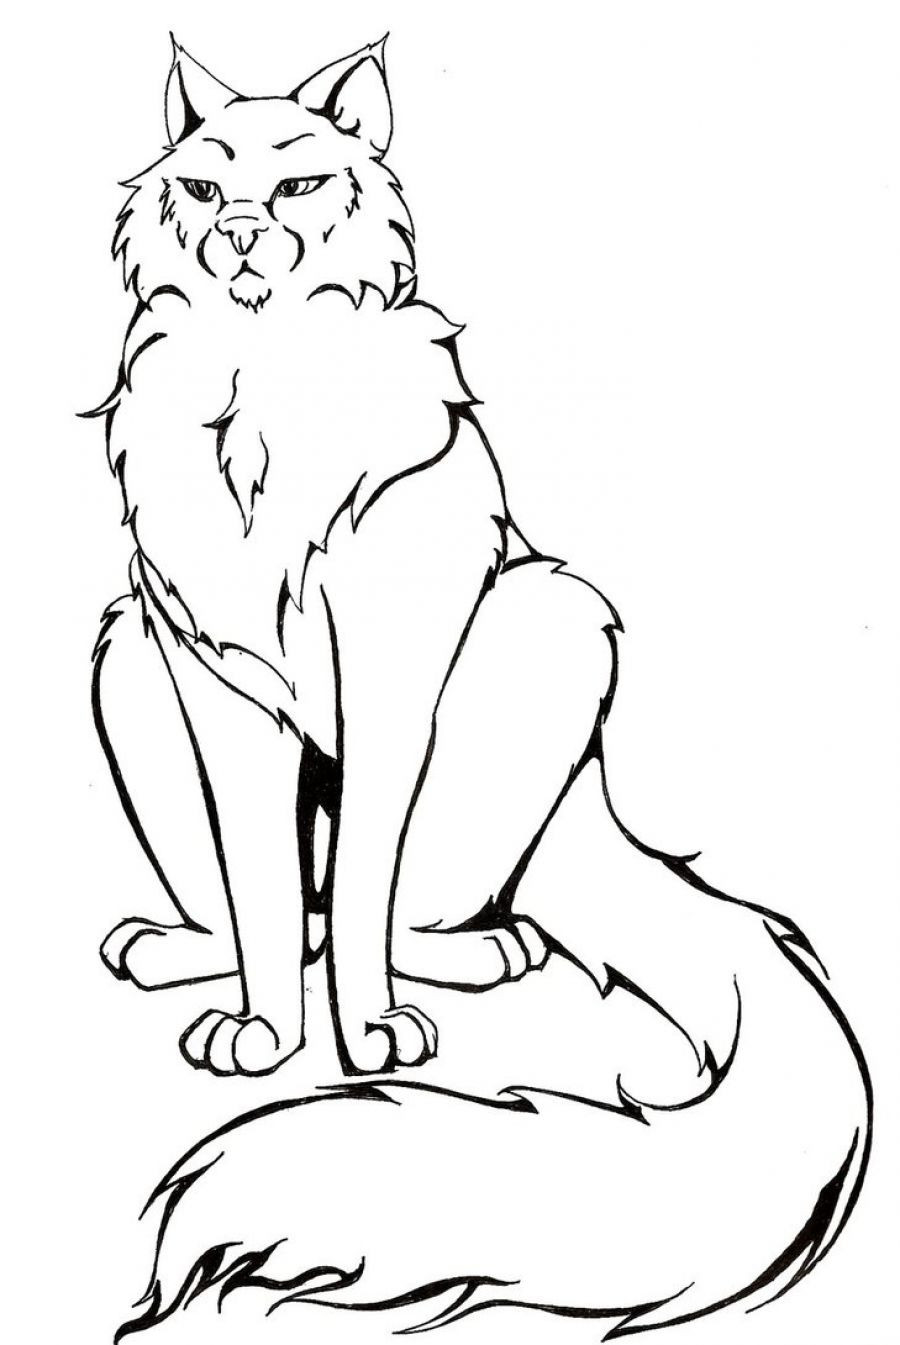 Warrior Cats Ausmalbilder
 Free coloring pages of warrior cats ausmalbild